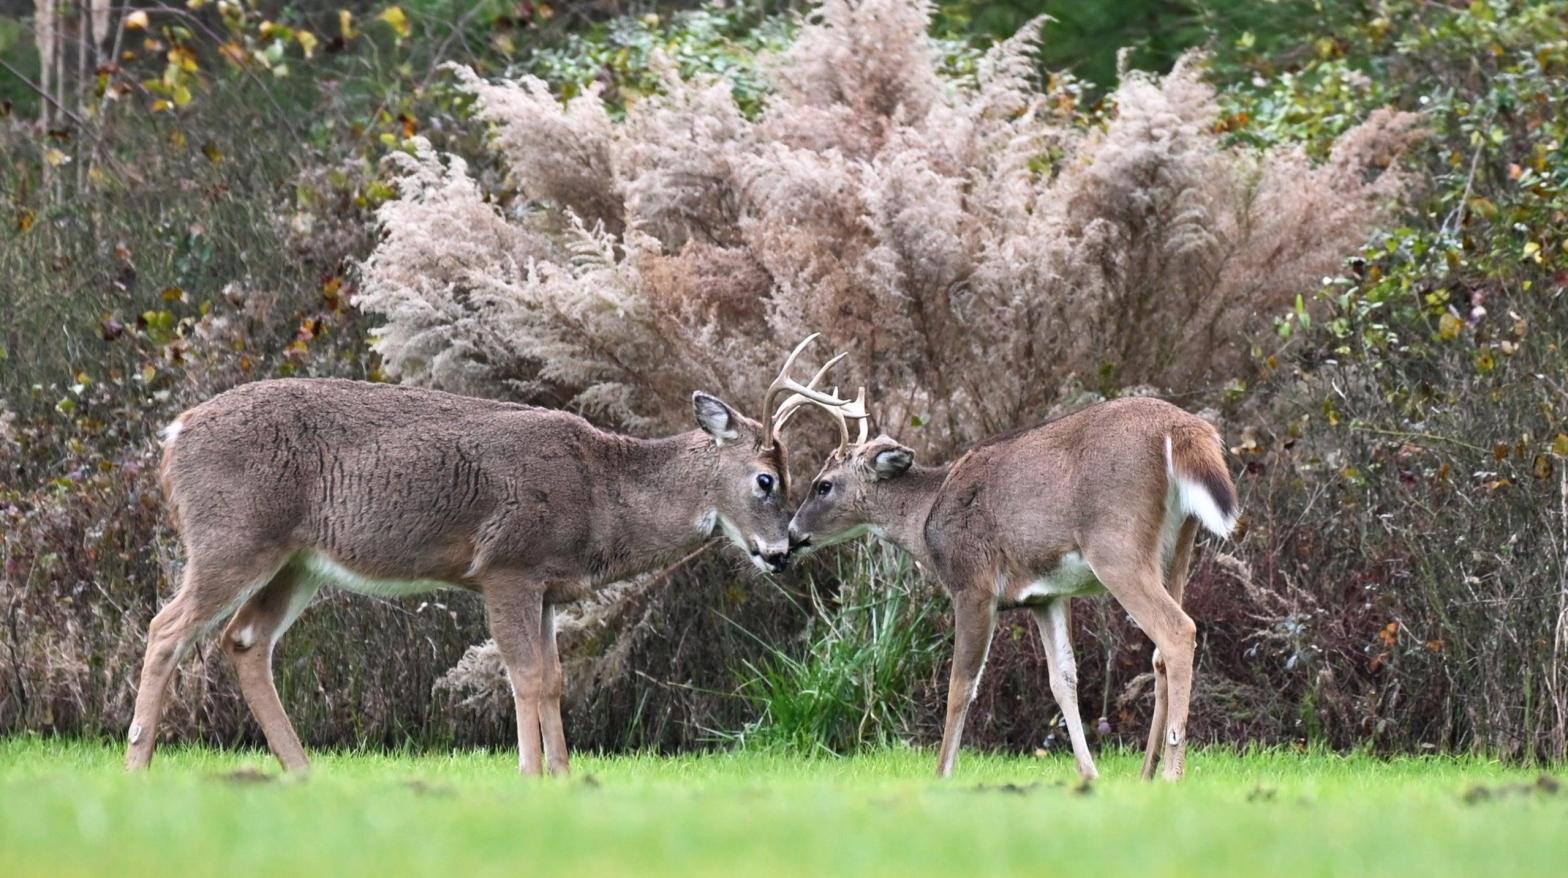 Two whitetail bucks are seen at Cape Henlopen State Park, in Lewes, Delaware, on November 25, 2020. (Image: Eve Hambach, Getty Images)